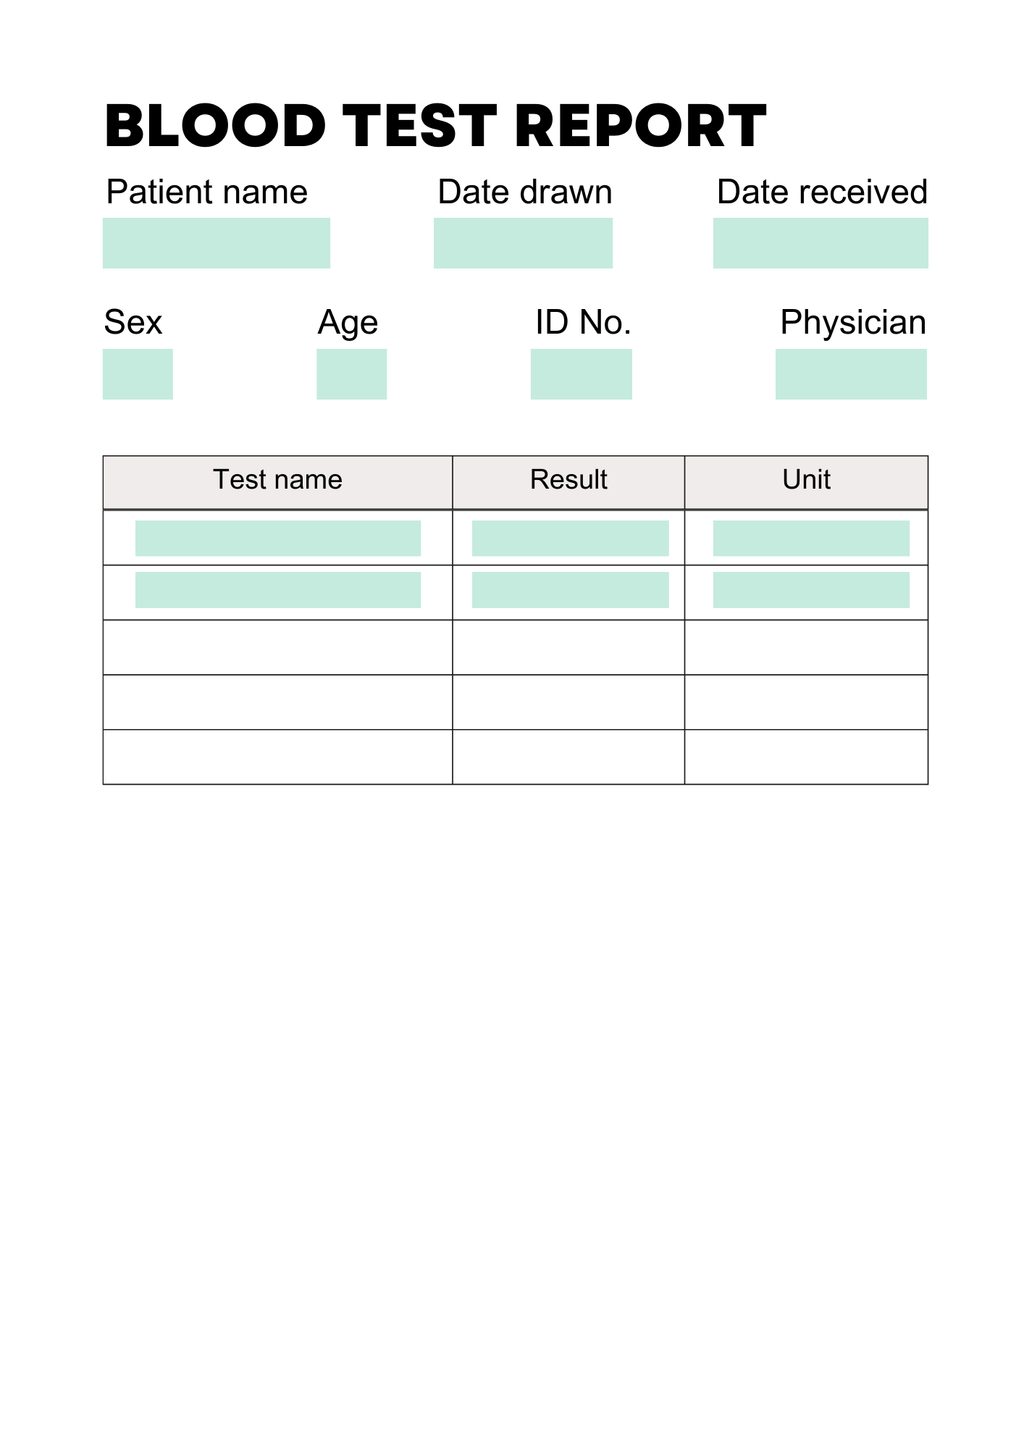 a visual representing a standard blood test report